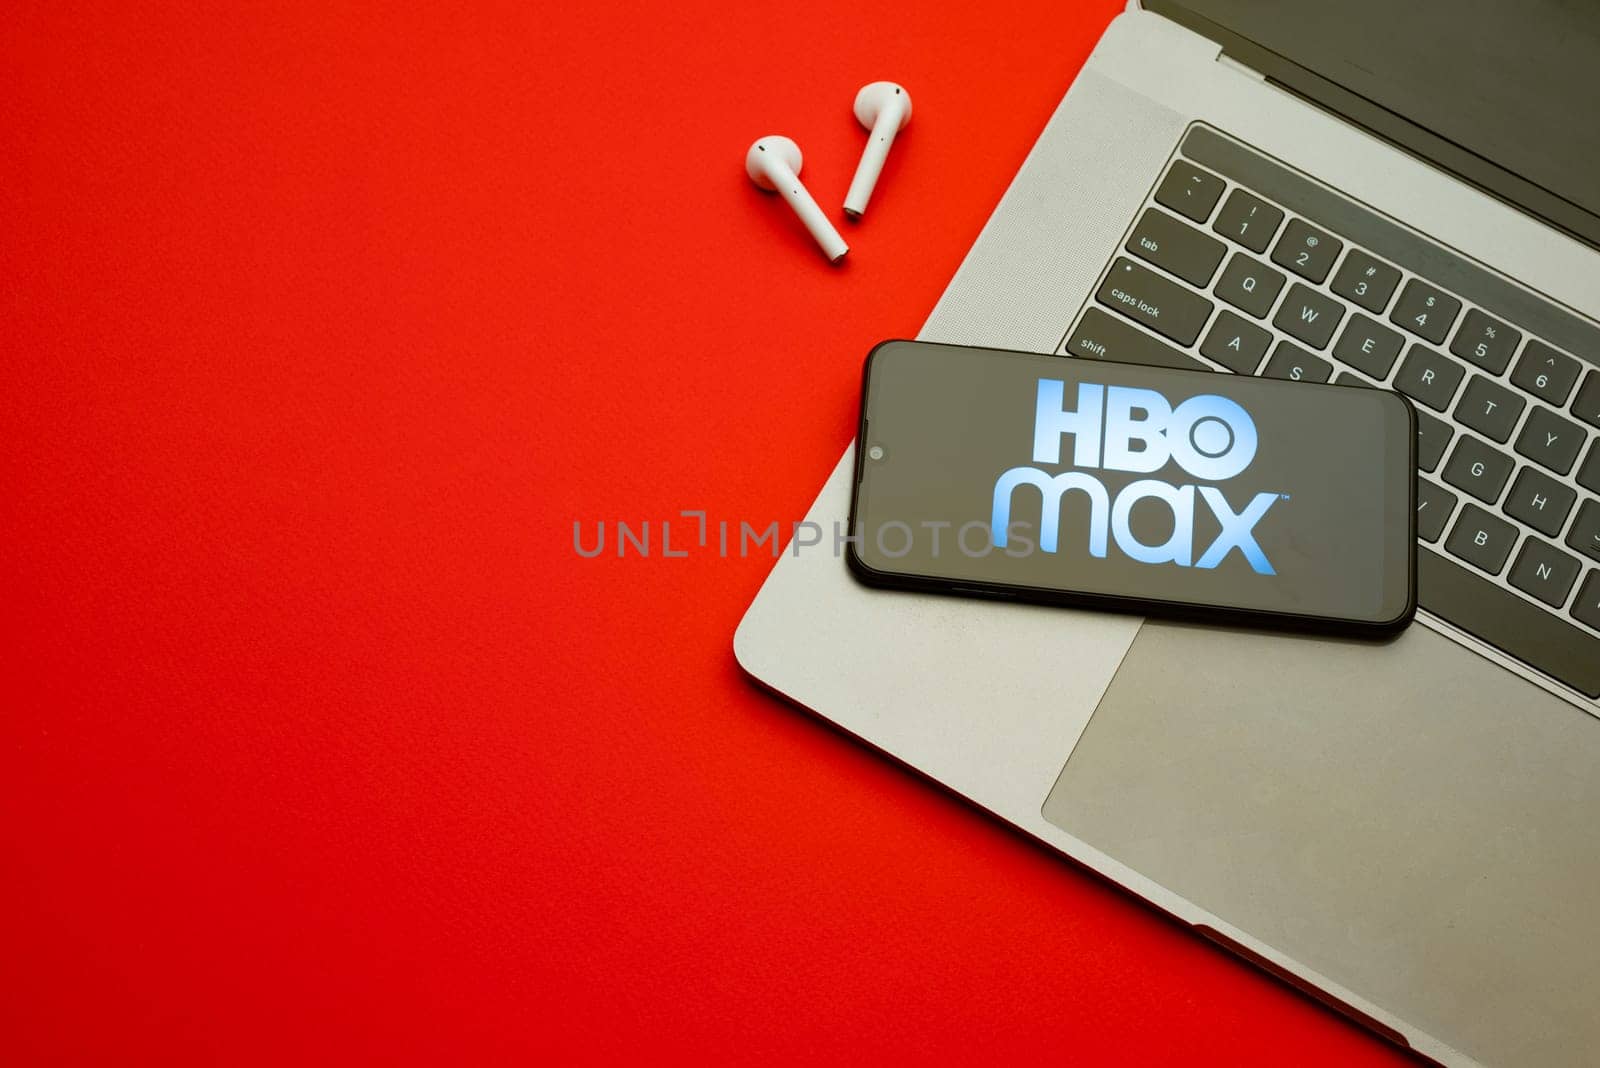 Tula, Russia - Jan 10, 2022: HBO Max logo on smartphone screen on red background. by zartarn